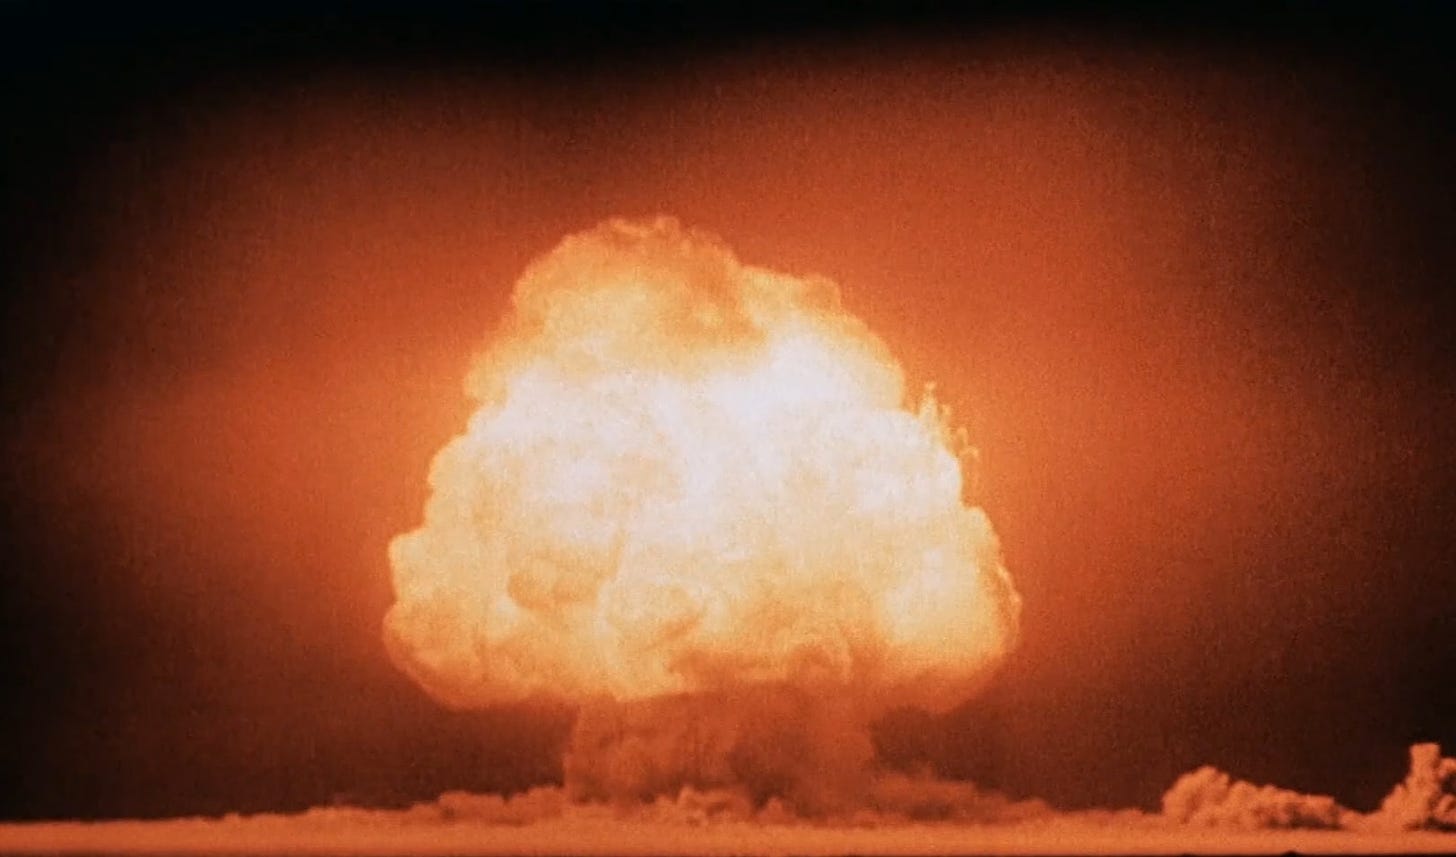 By United States Department of Energy - Trinity and Beyond: The Atomic Bomb Movie, Public Domain, https://commons.wikimedia.org/w/index.php?curid=63457849